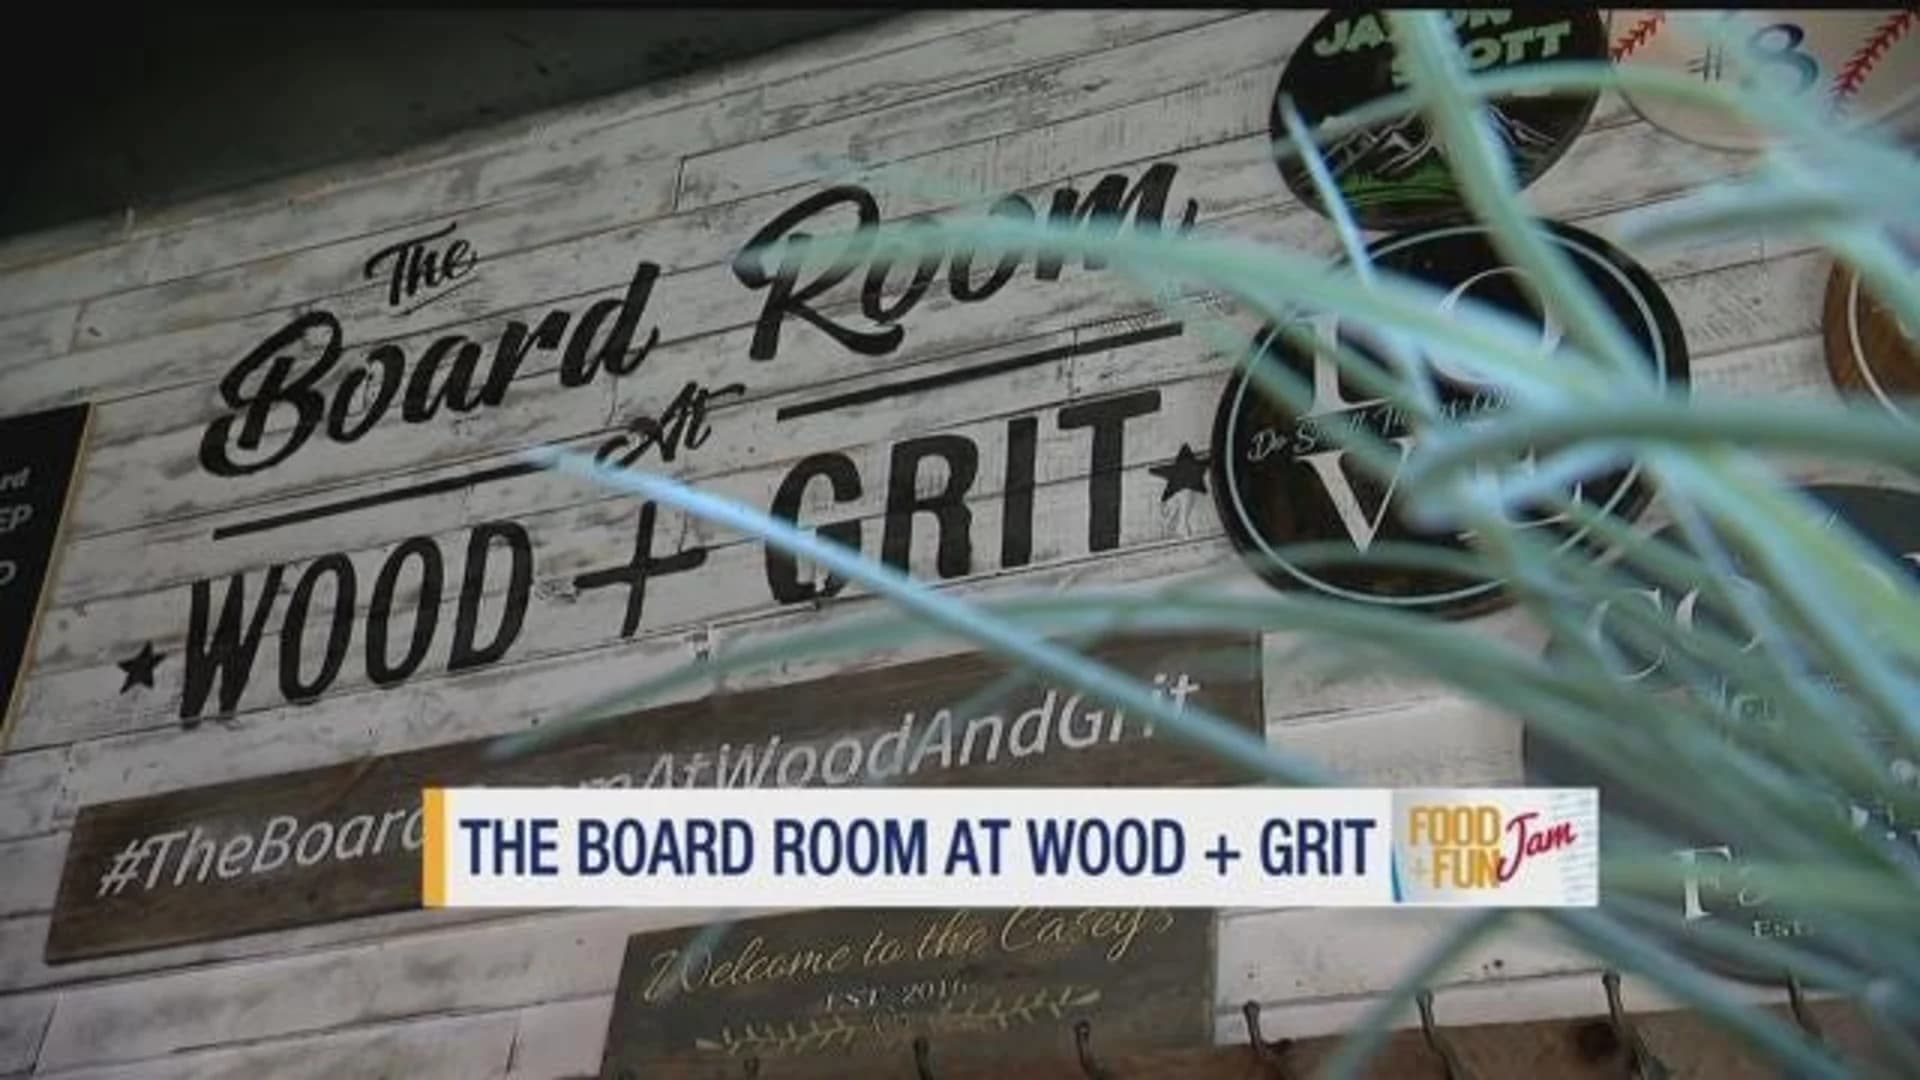 Food and Fun Jam: The Boardroom at Wood + Grit